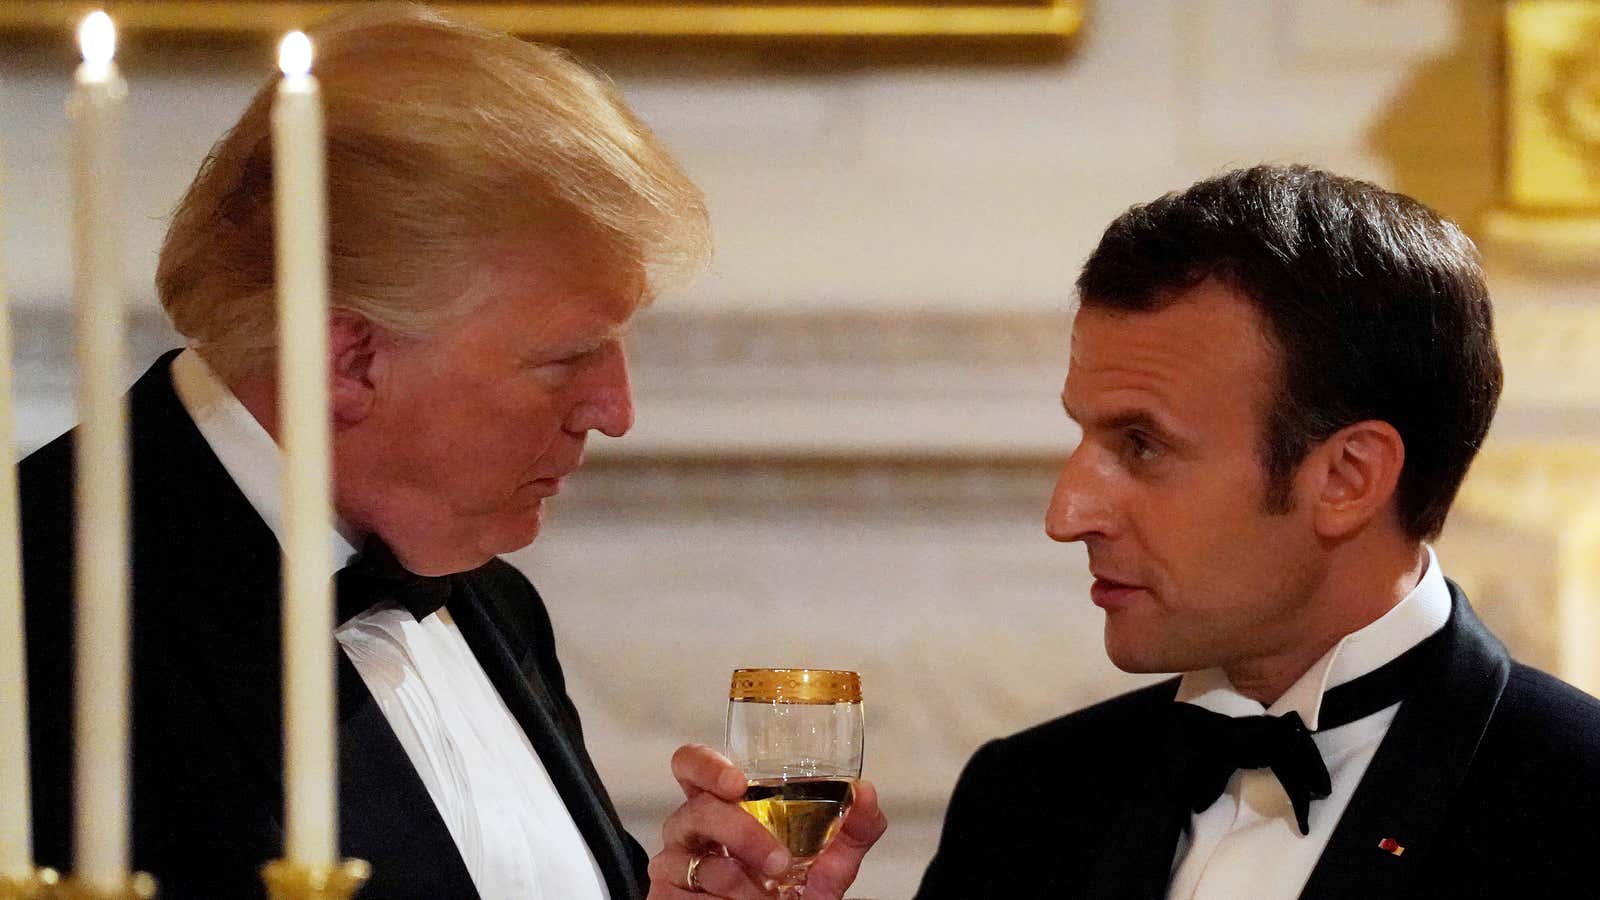 Comments on process do not make for a great meal, Macron says.